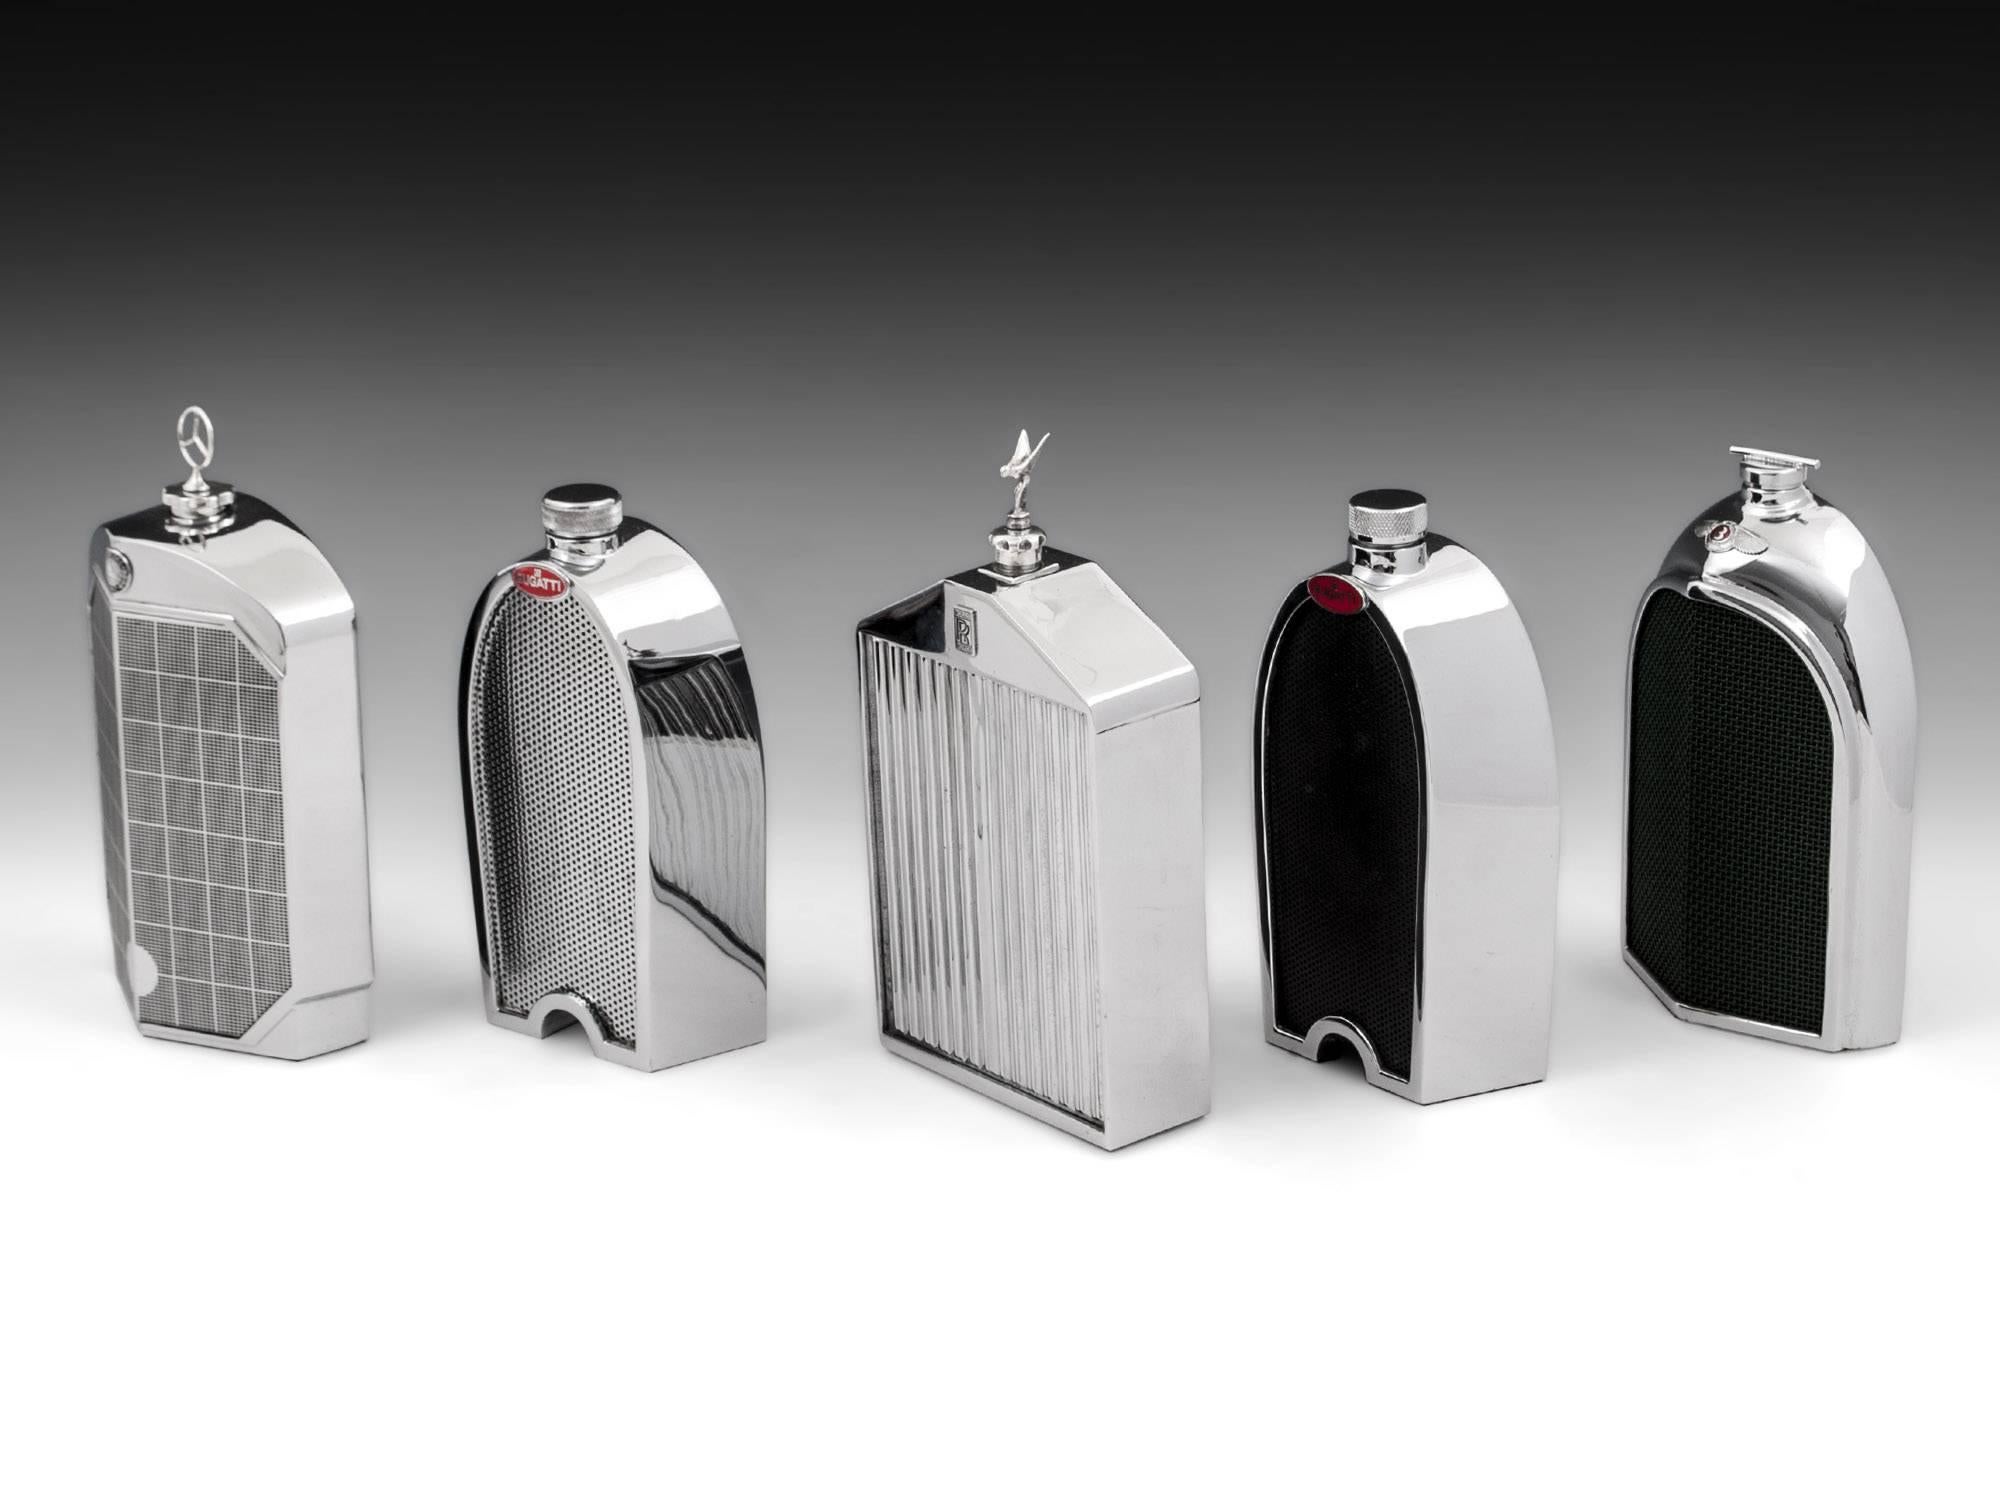 A group of car radiator decanters comrpising chrome bodies wrapped around a single glass decanter. Each with a viewing slot so you can view the spirit levels and not over fill. 

Both Bugatti and bentley decanters have realistic red enamelled